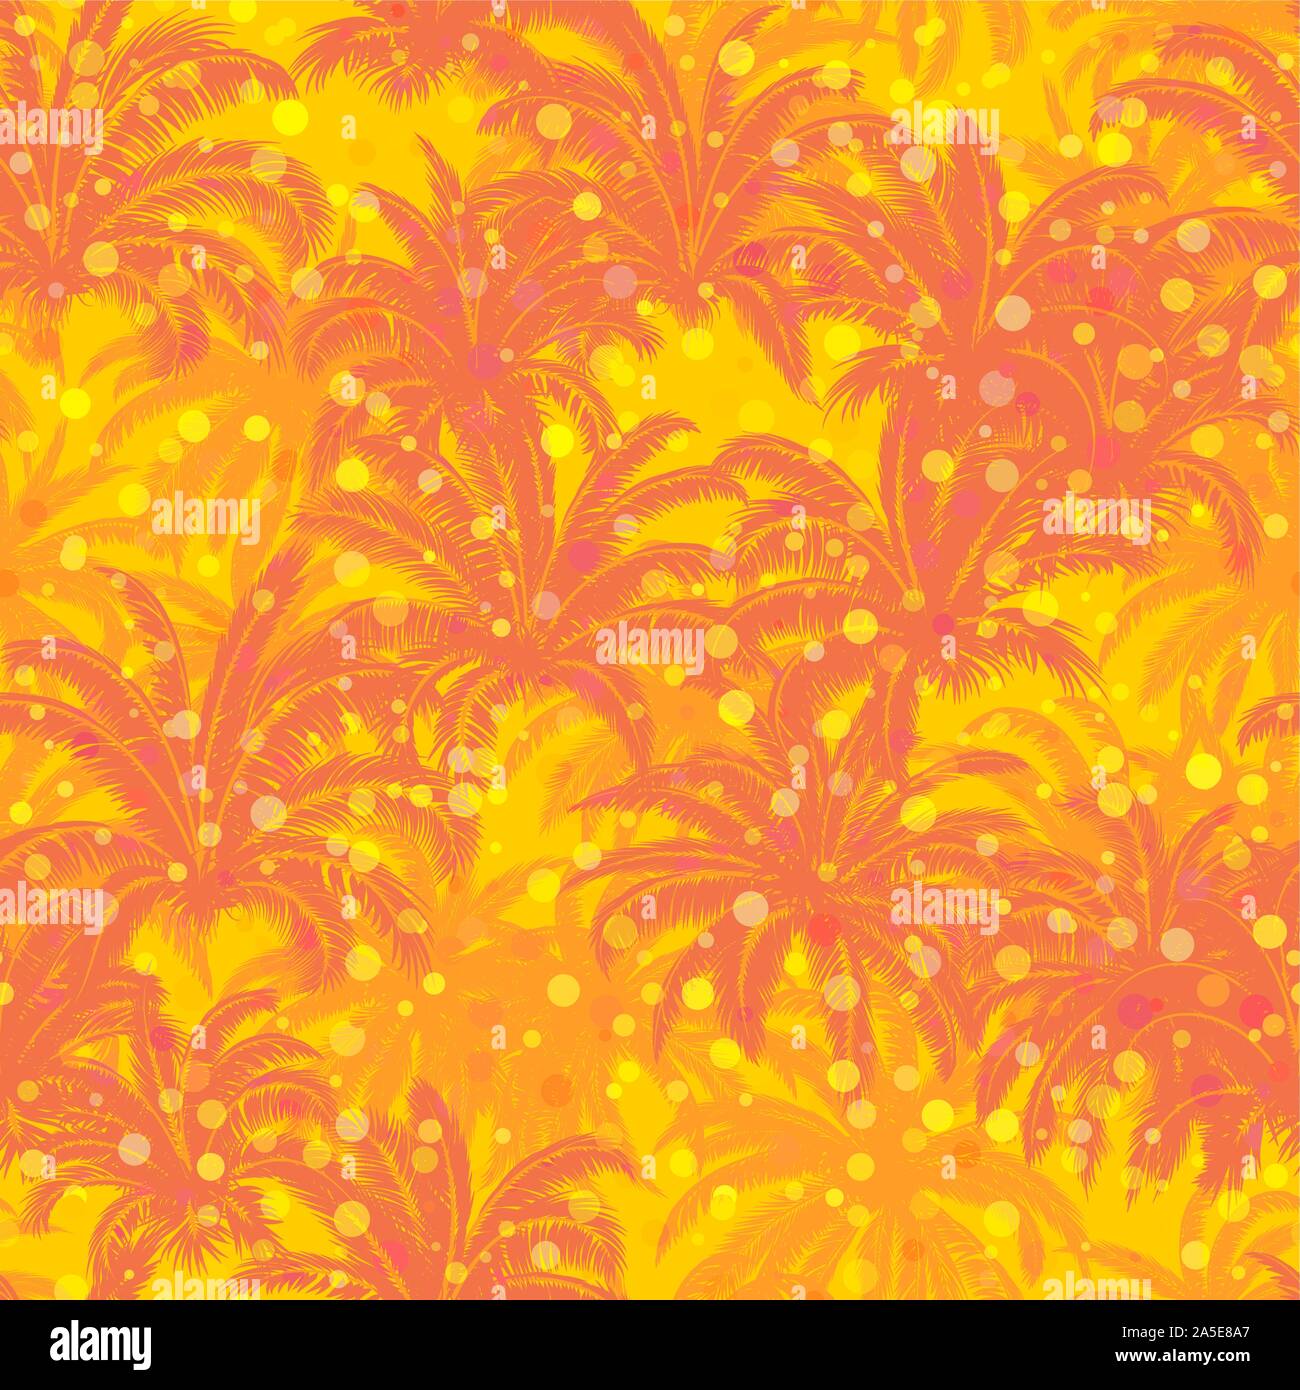 Seamless Background, Tropical Palm Trees, Crowns with Leaves, Red and Yellow Tile Pattern. Vector Stock Vector